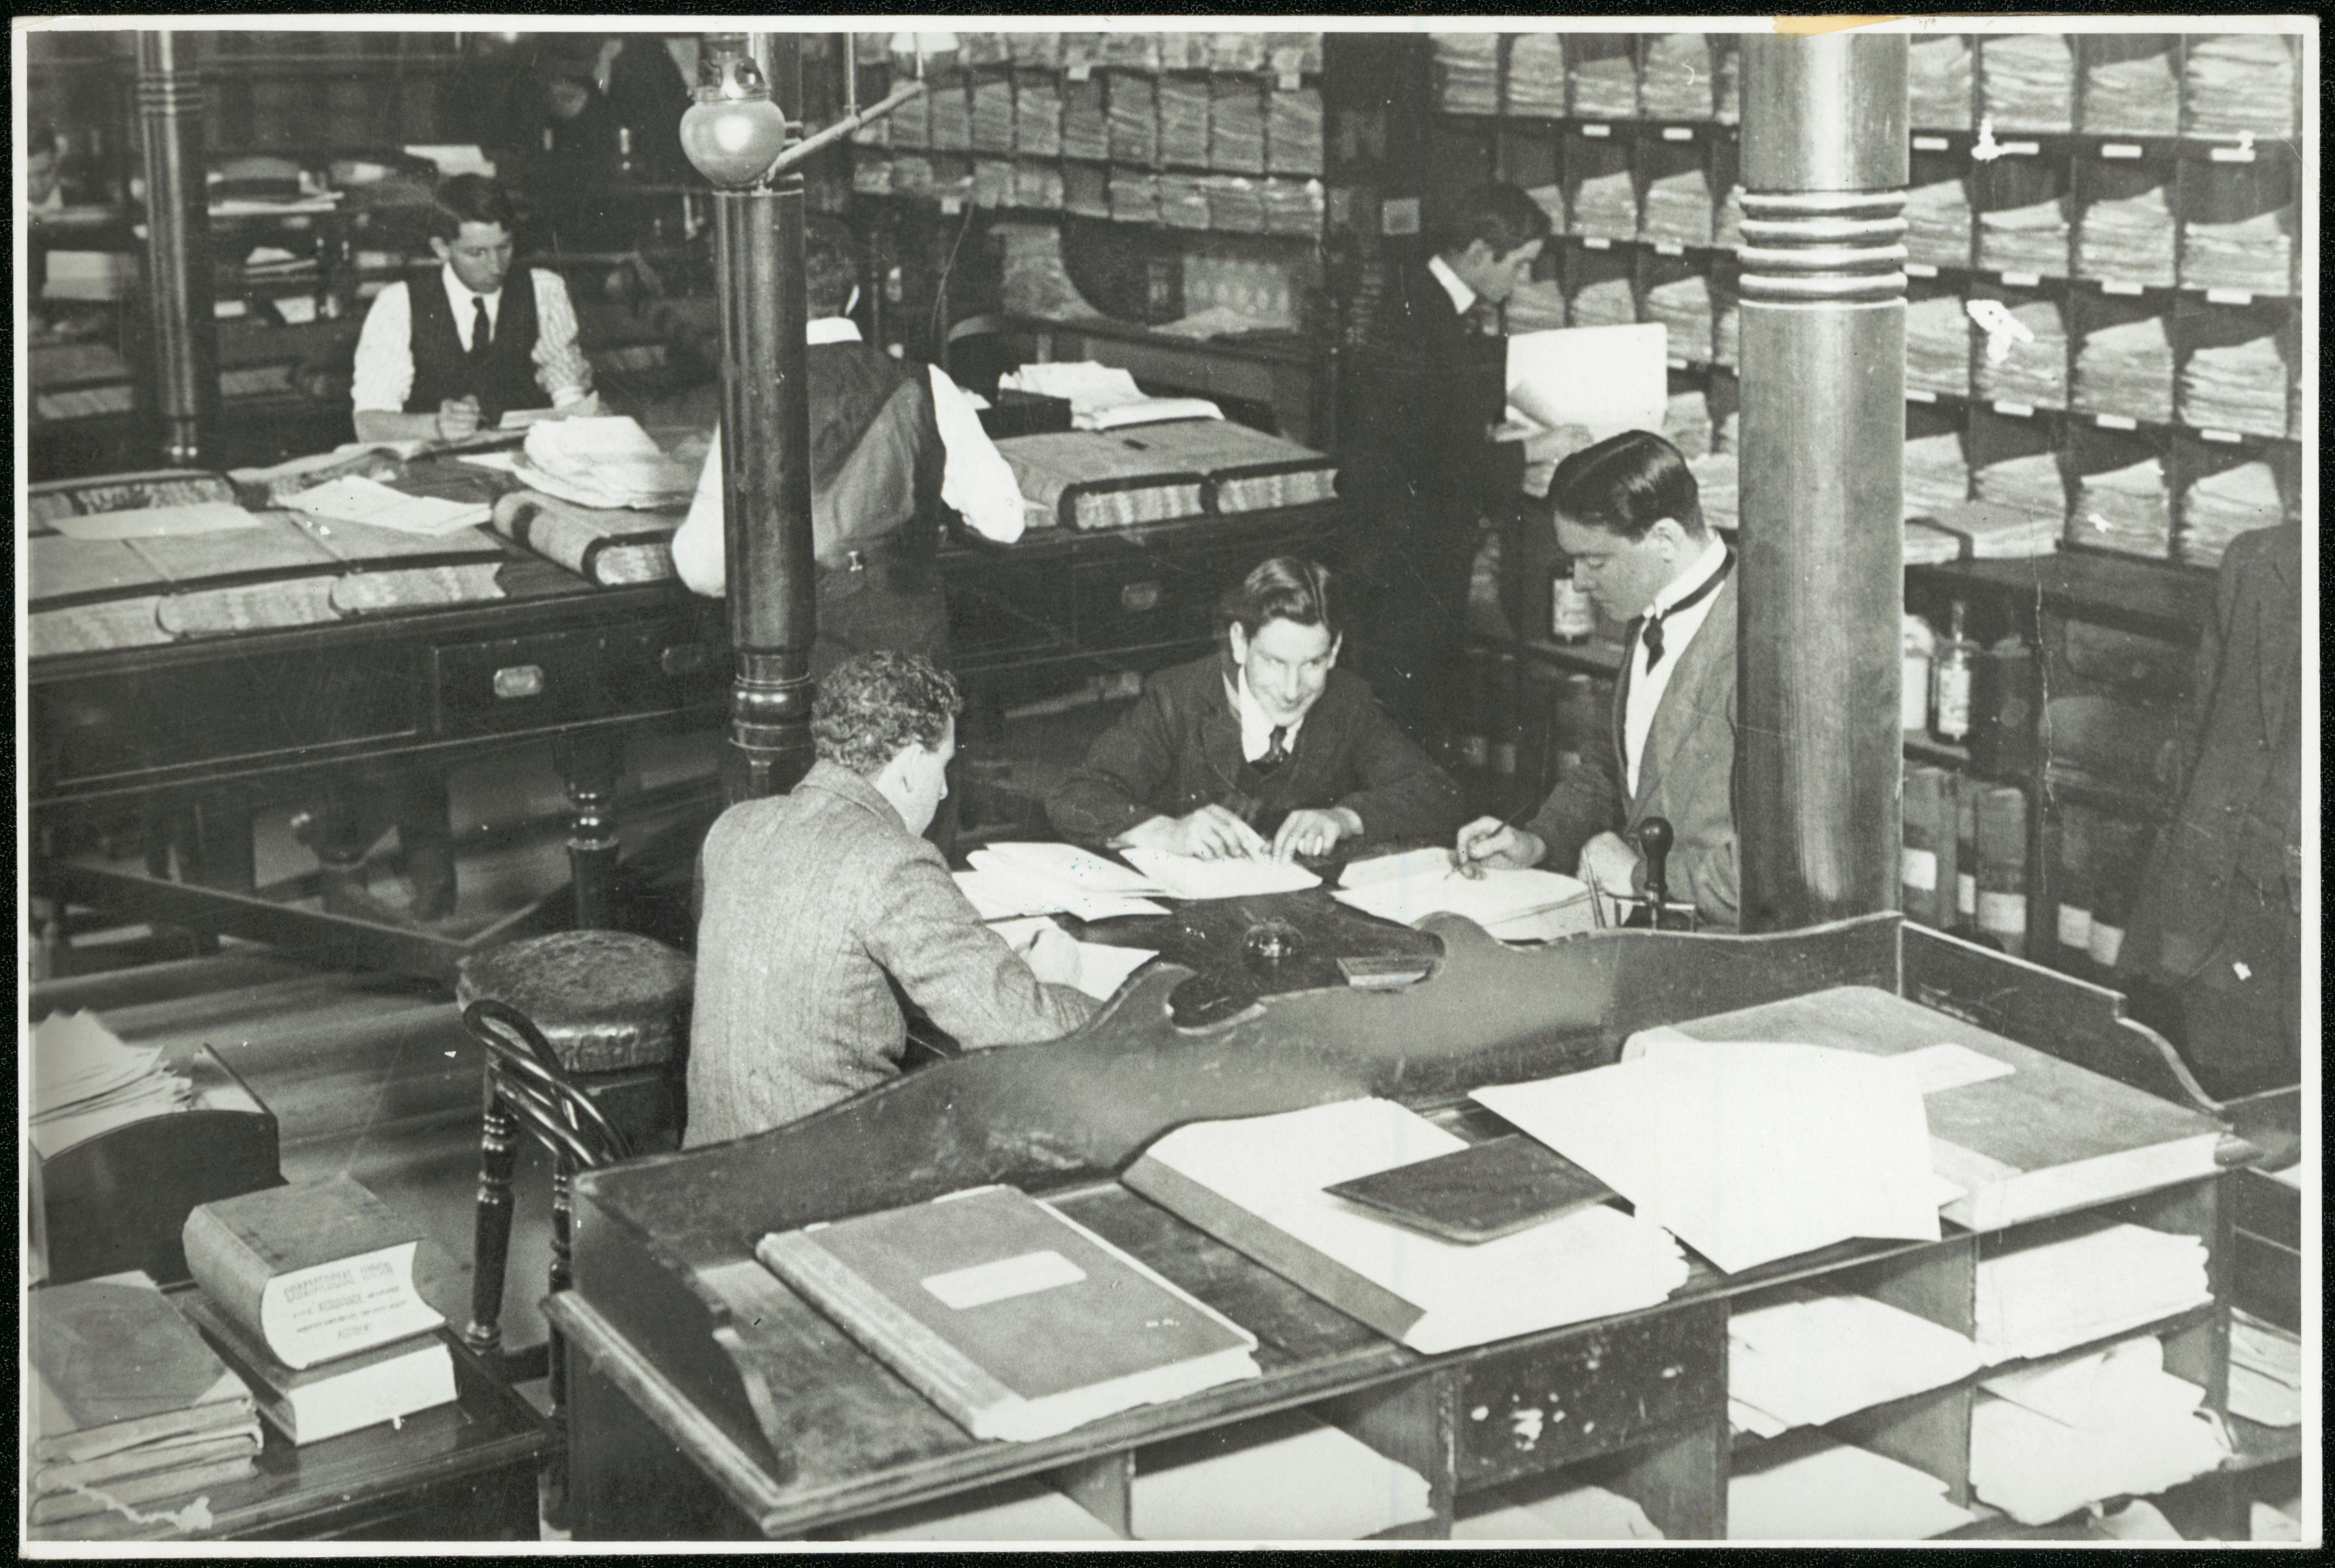 Black and white photo of clerks working at desks in an office, surrounded by large ledgers and pigeon holes and paperwork.